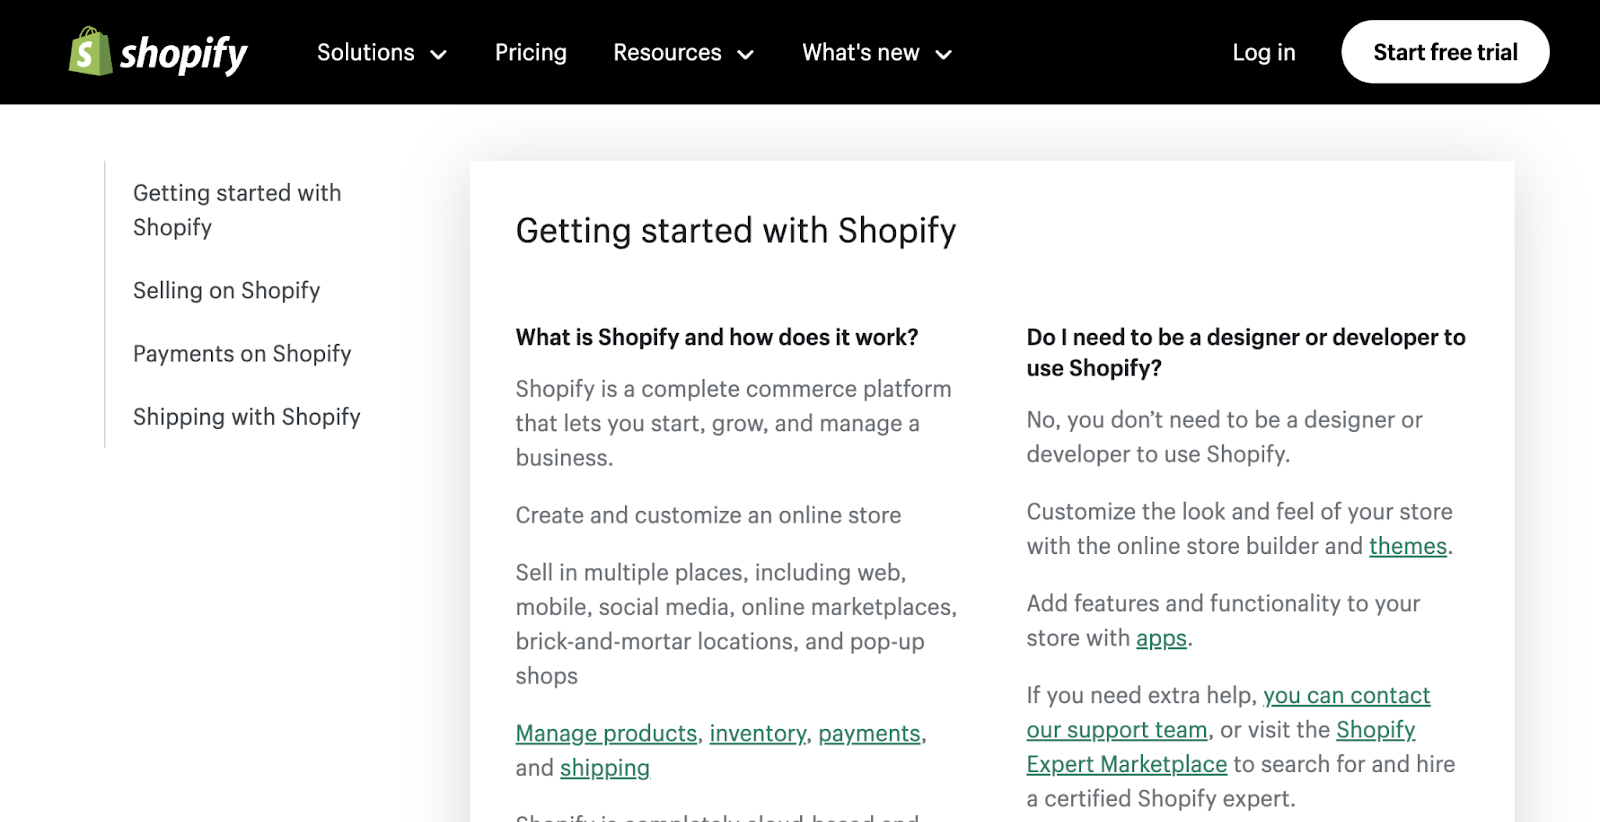 Shopify faq leafage   has sections for getting started, selling, payments, and shipping